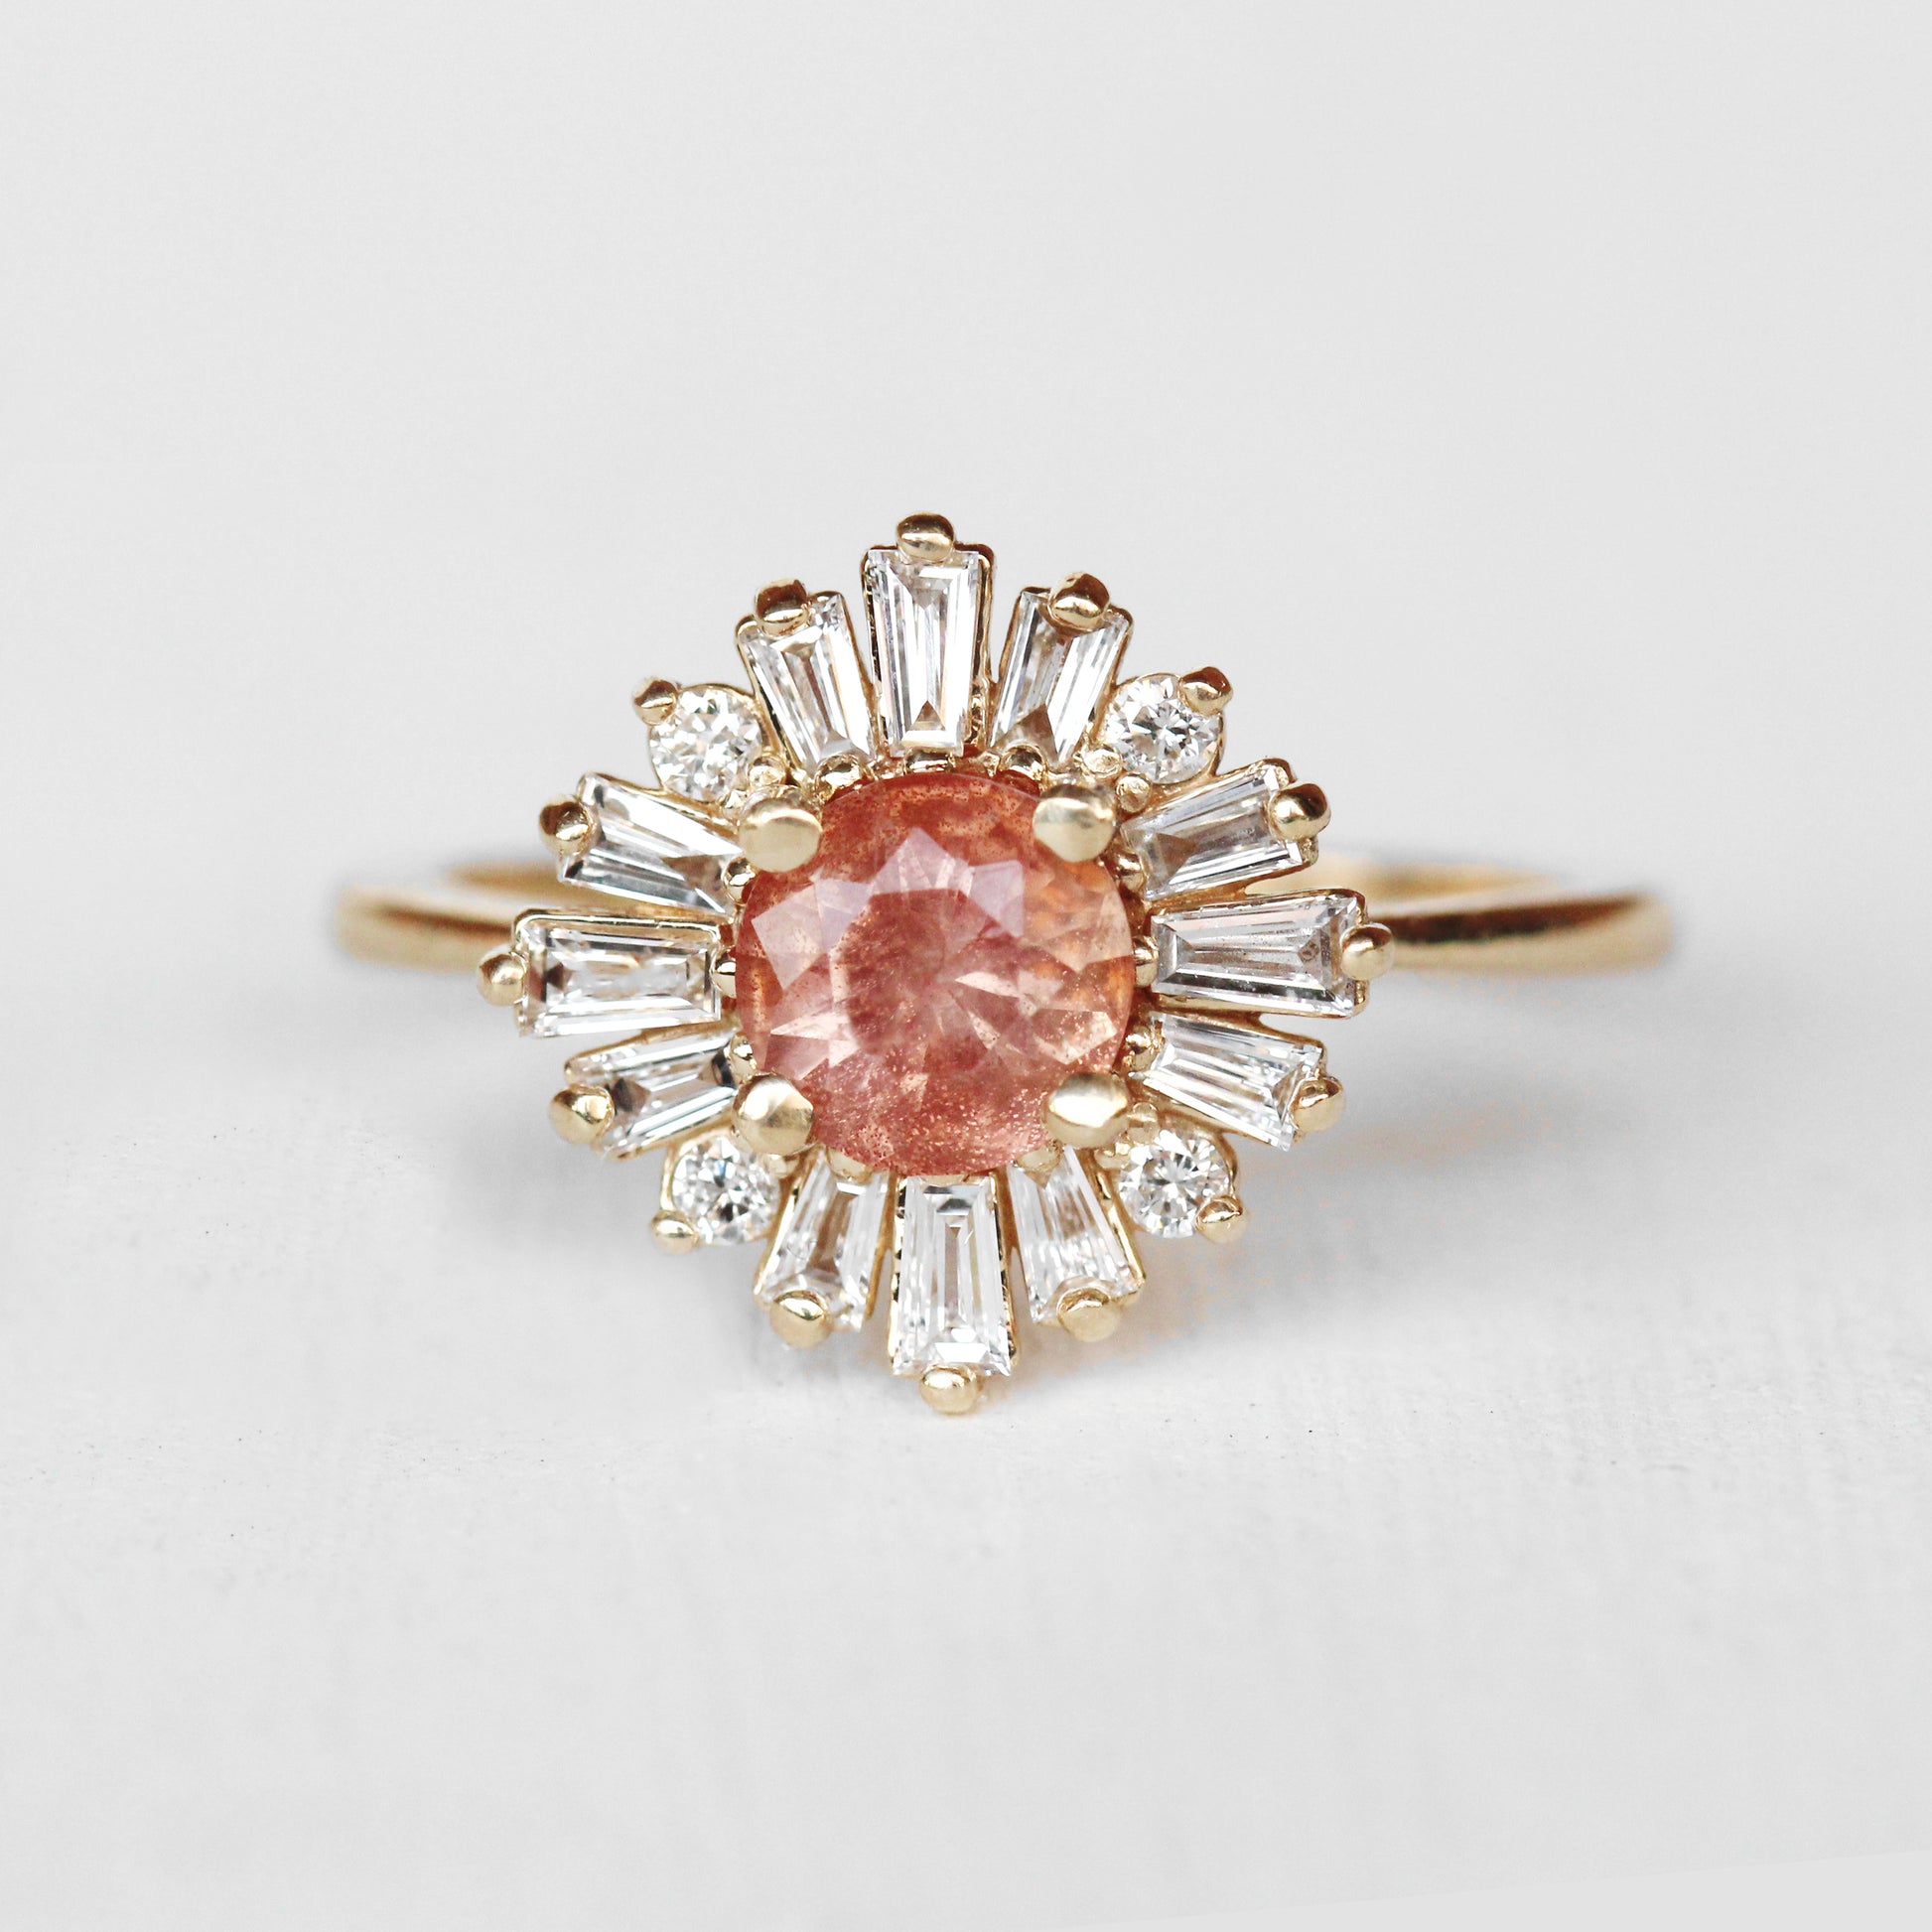 Veda Setting - Midwinter Co. Alternative Bridal Rings and Modern Fine Jewelry